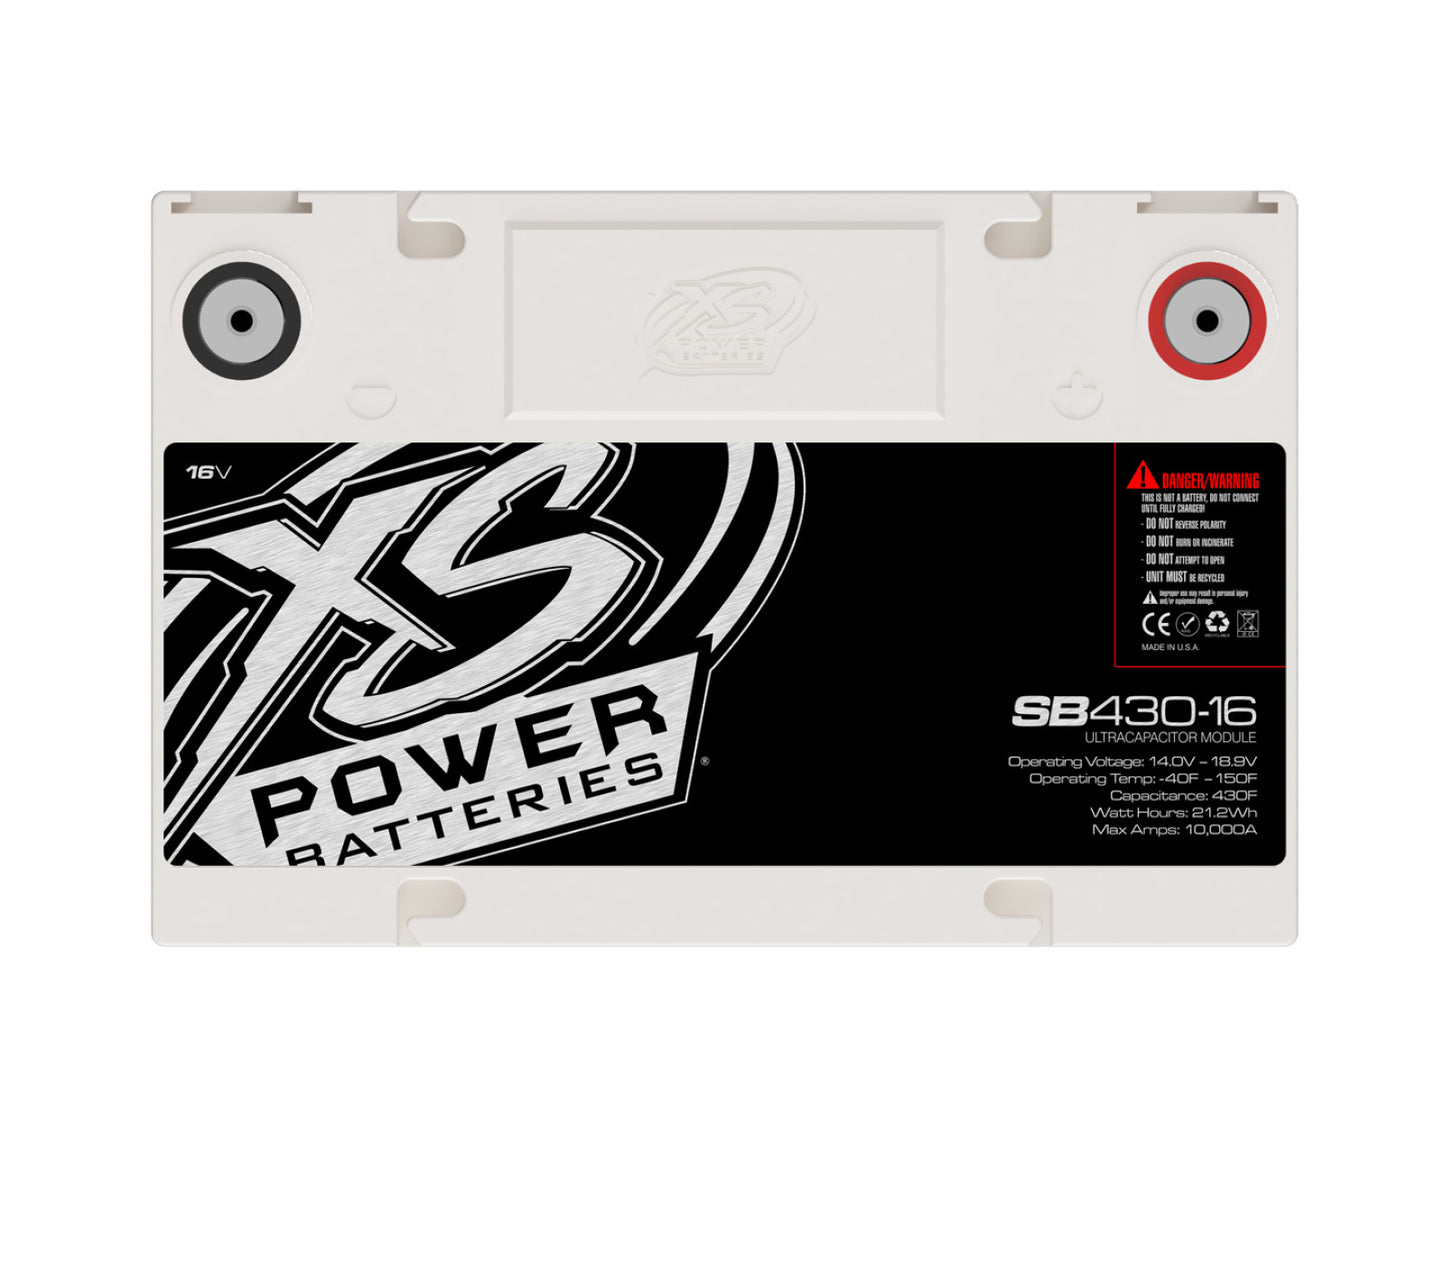 XS Power Batteries 16V Super Bank Capacitor Modules - M6 Terminal Bolts Included 10000 Max Amps SB430-16